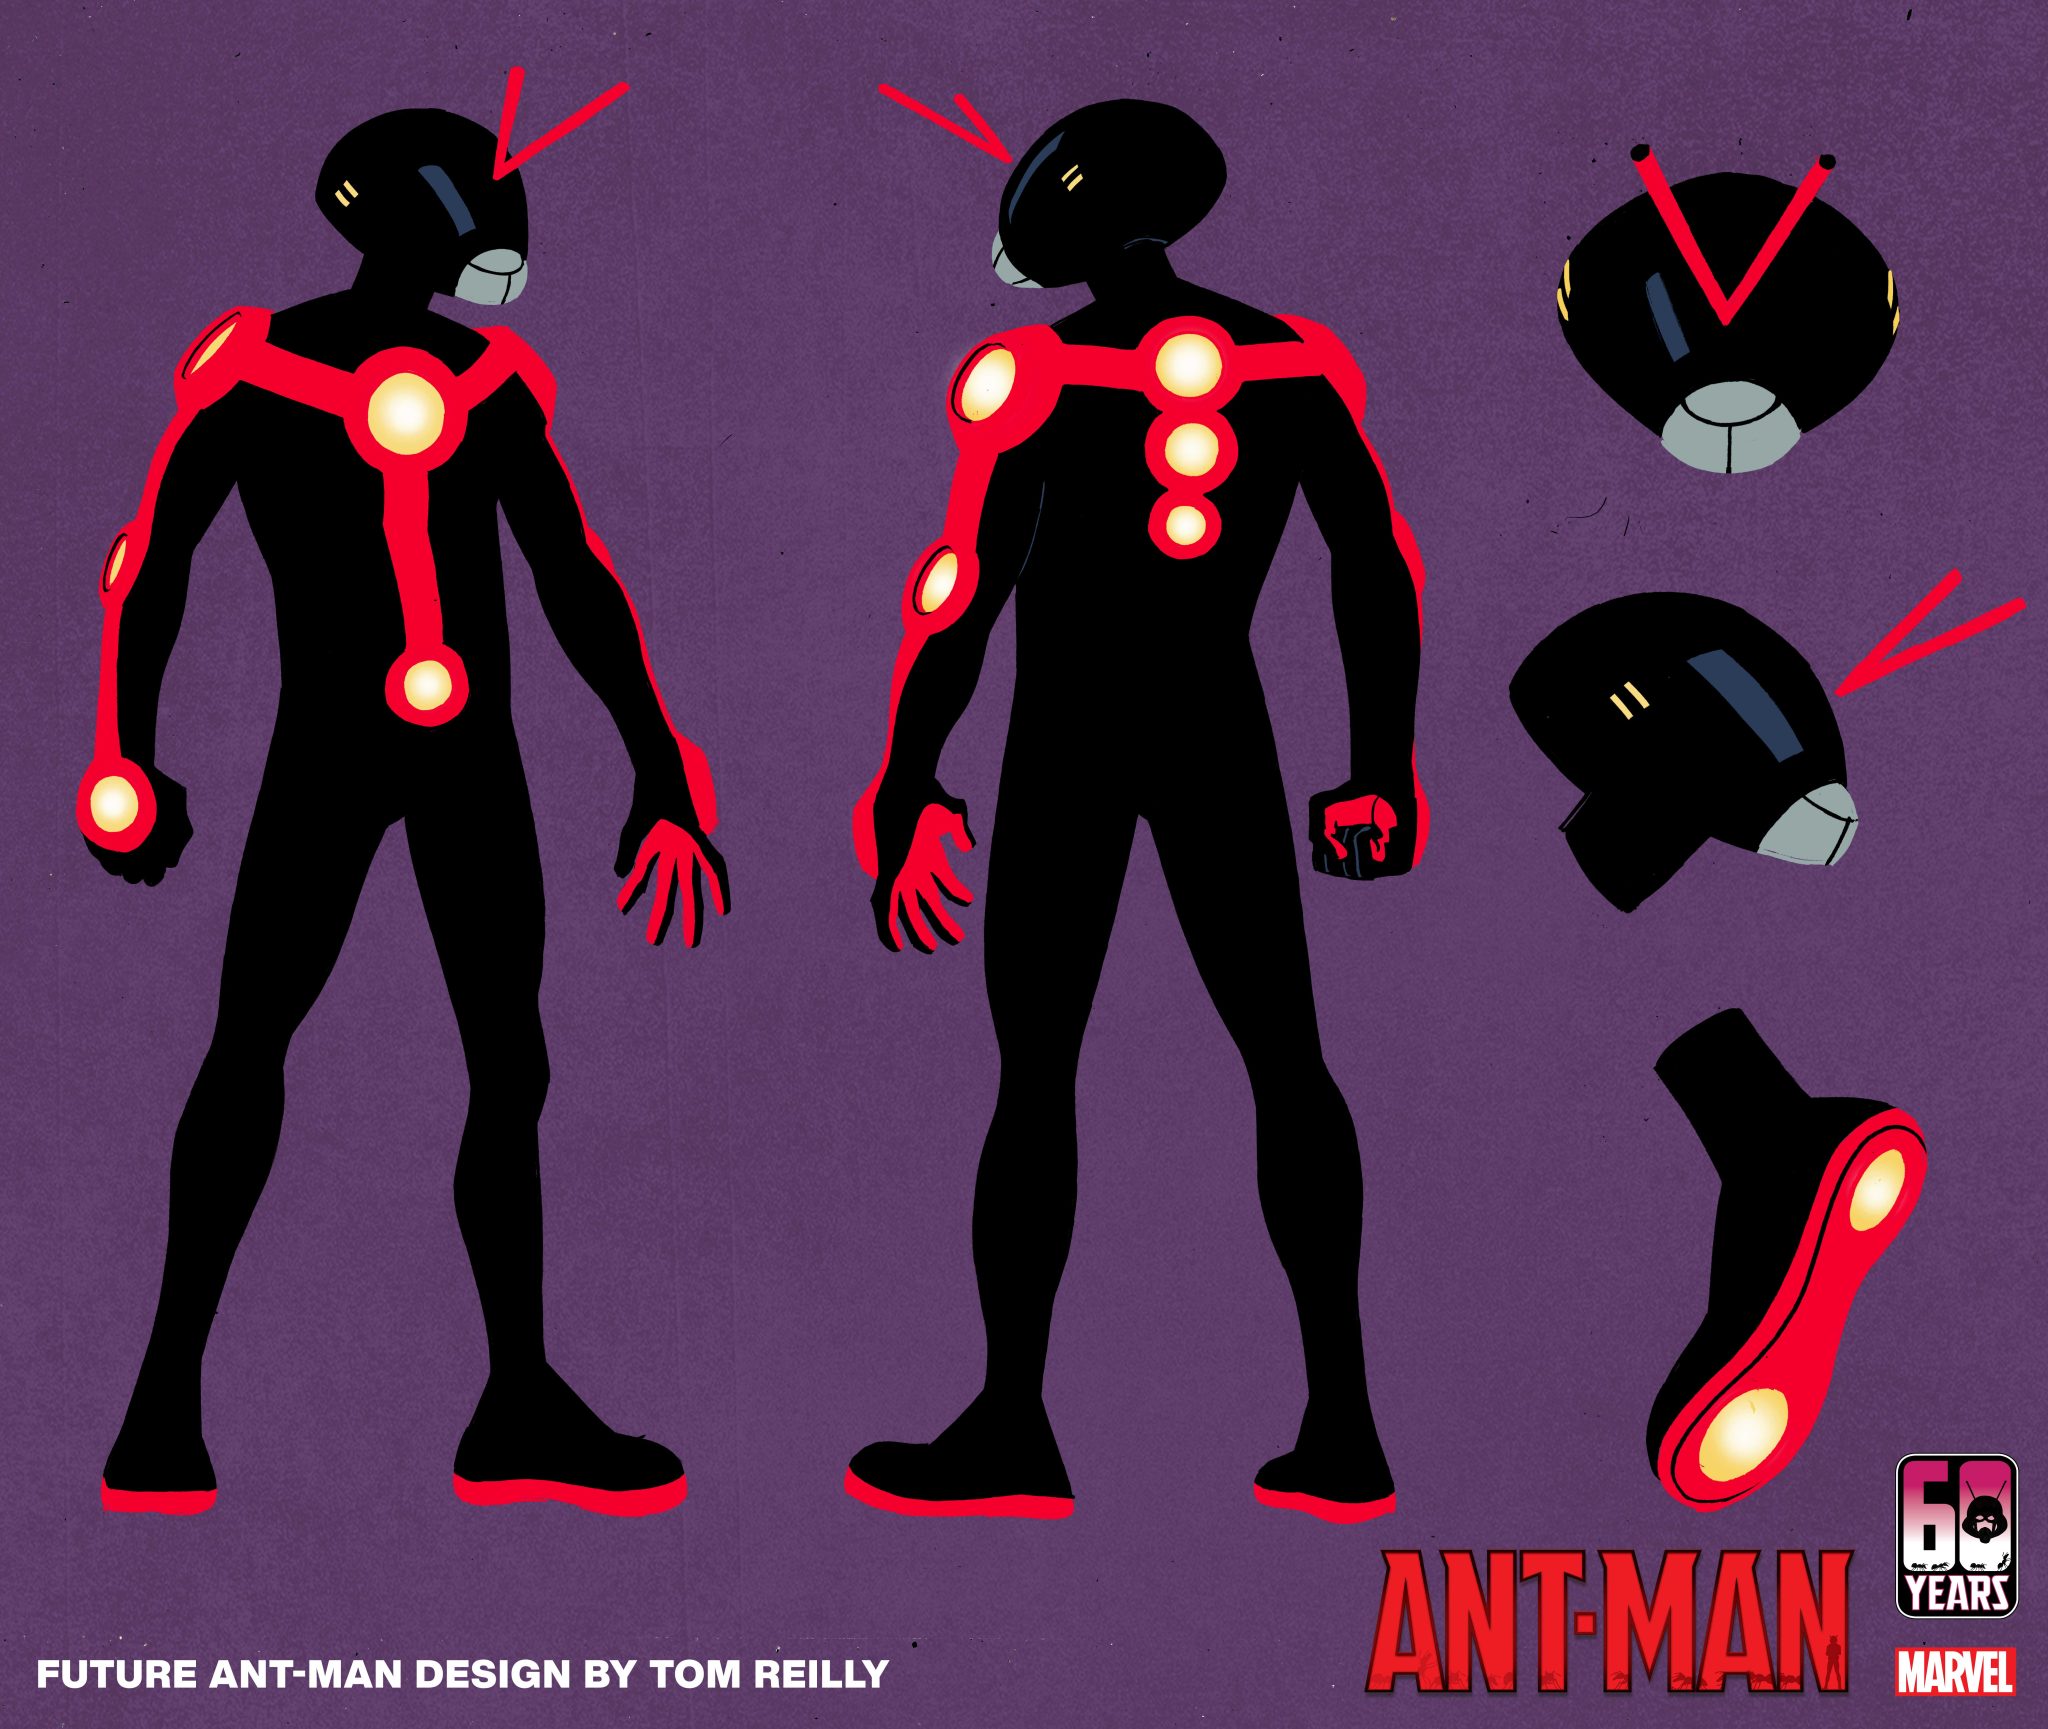 Future Ant-Man art by Tom Reilly